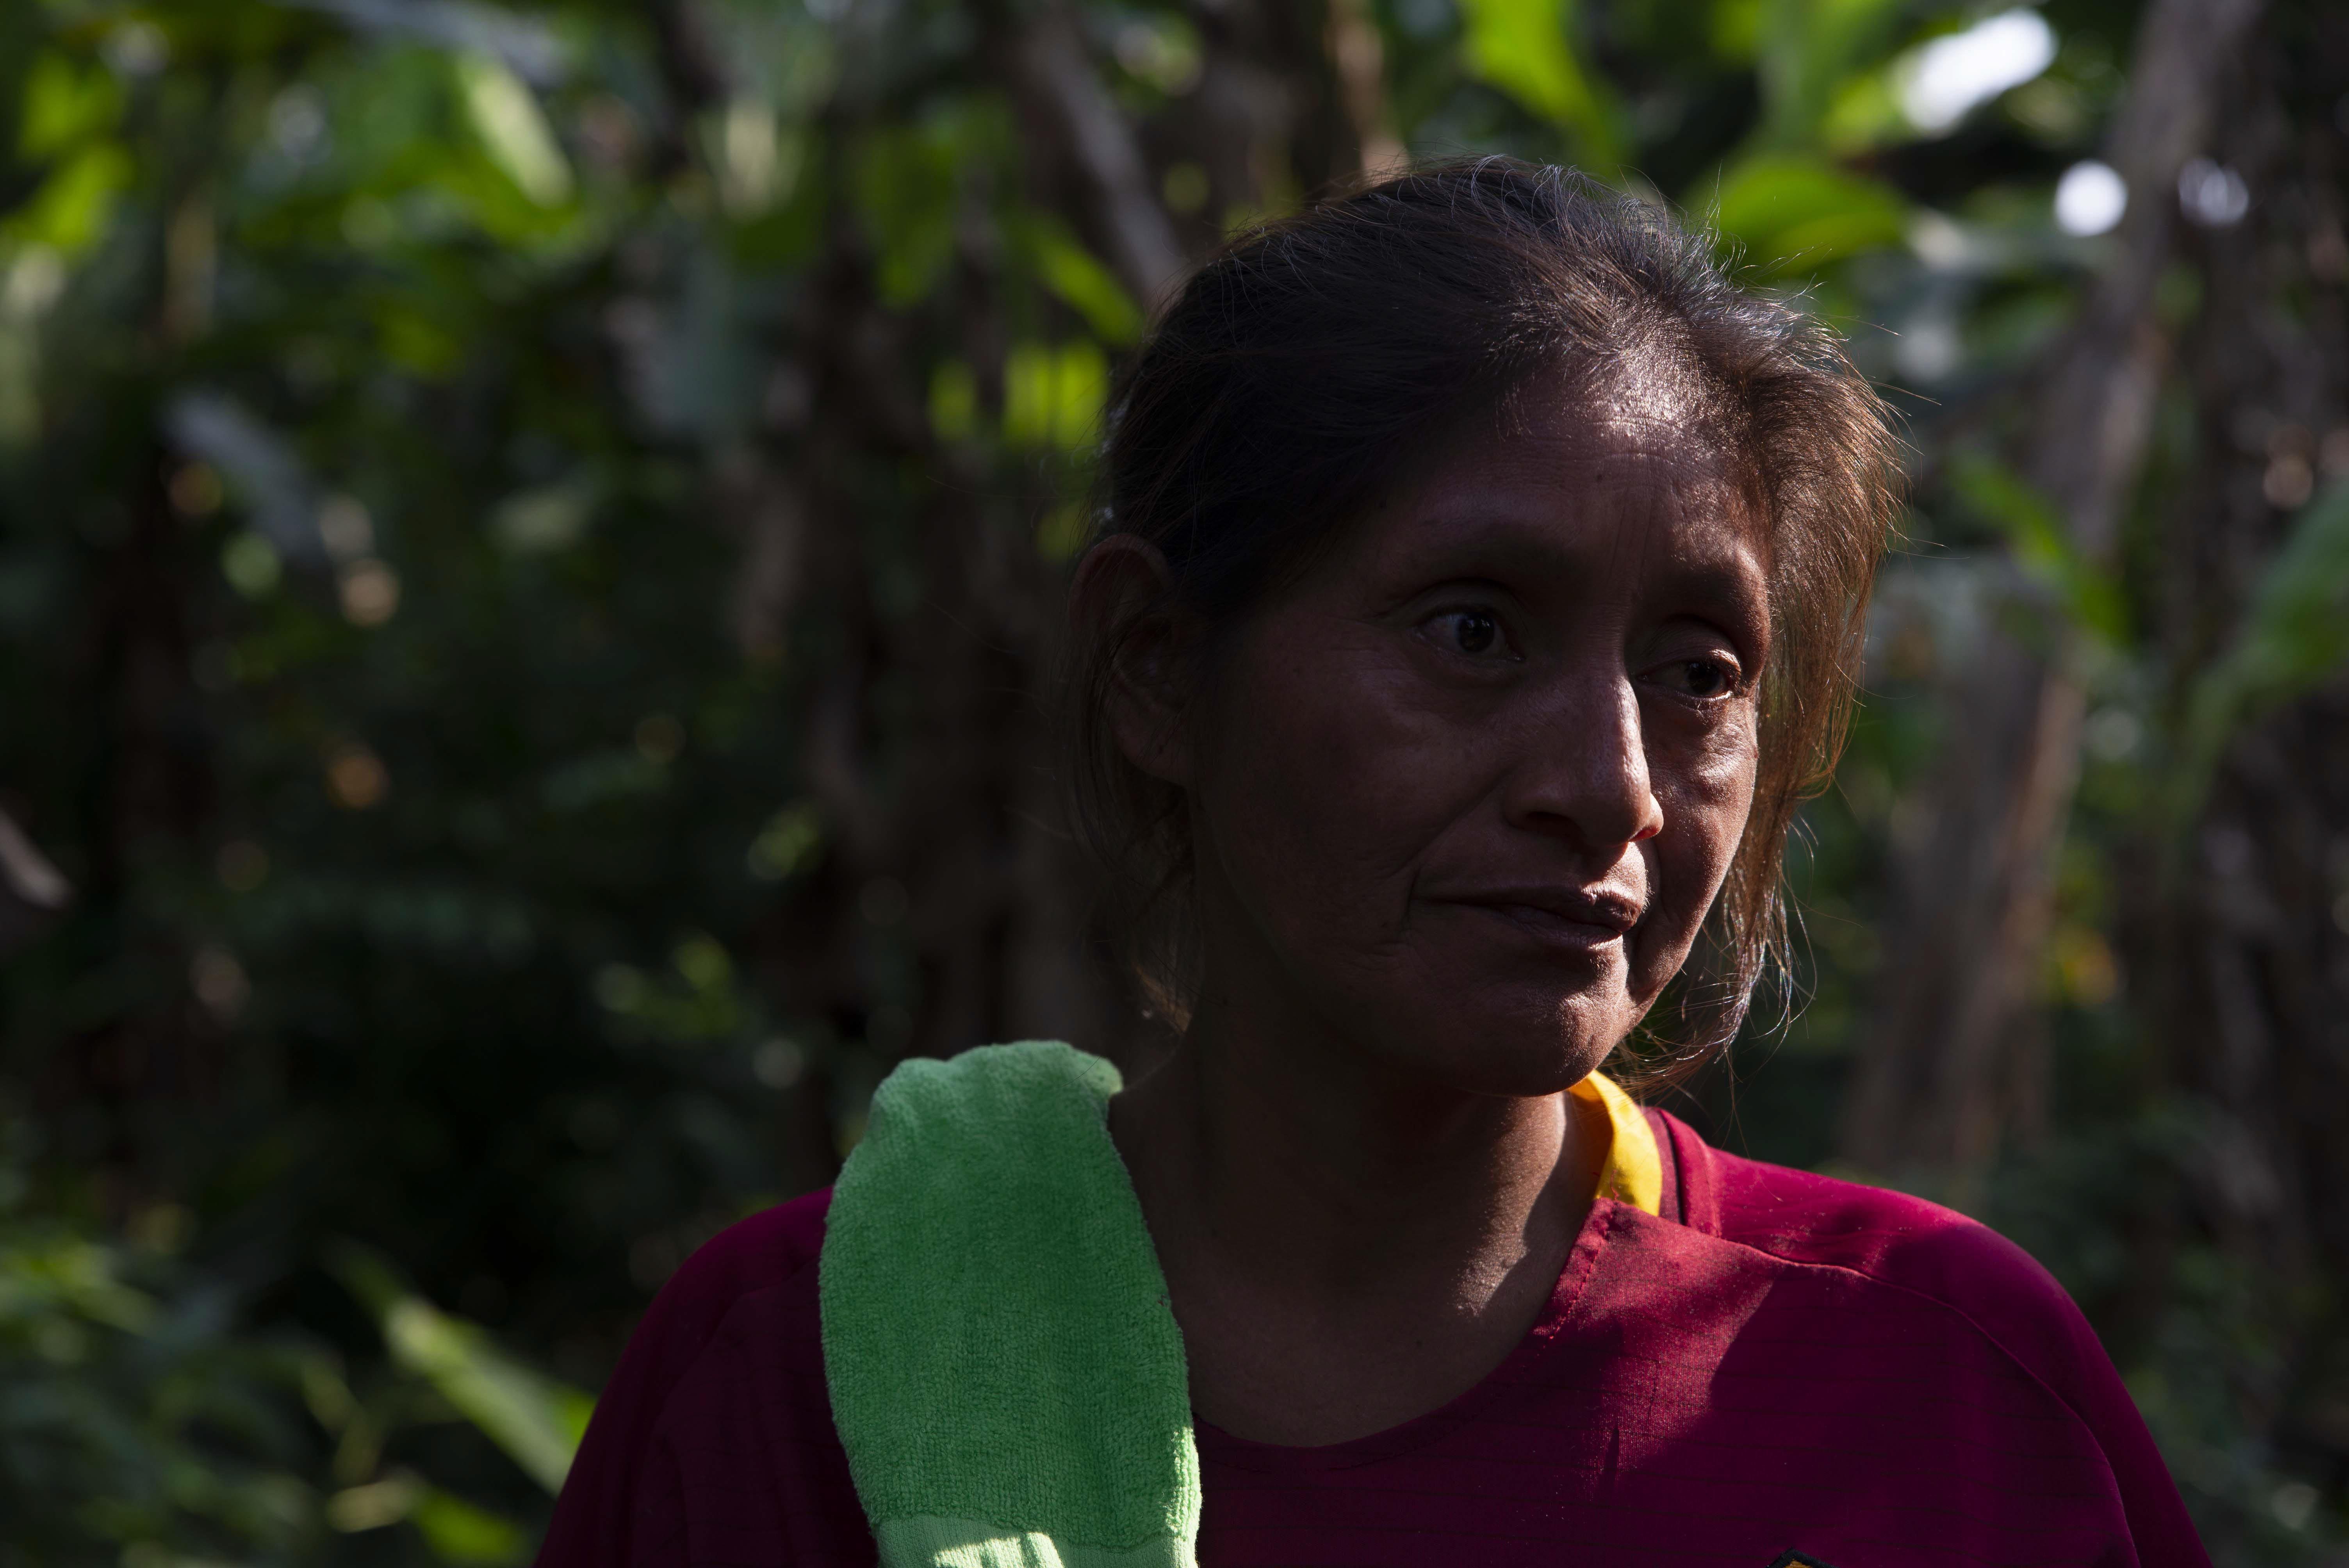 Carmen Isategua, the cacique of the Yuqui community, is in charge of watching over the wellbeing of the community and at the same time defending the territory from illegal actions of agents from outside the community. Photo by Sara Aliaga. Bolivia, 2020.